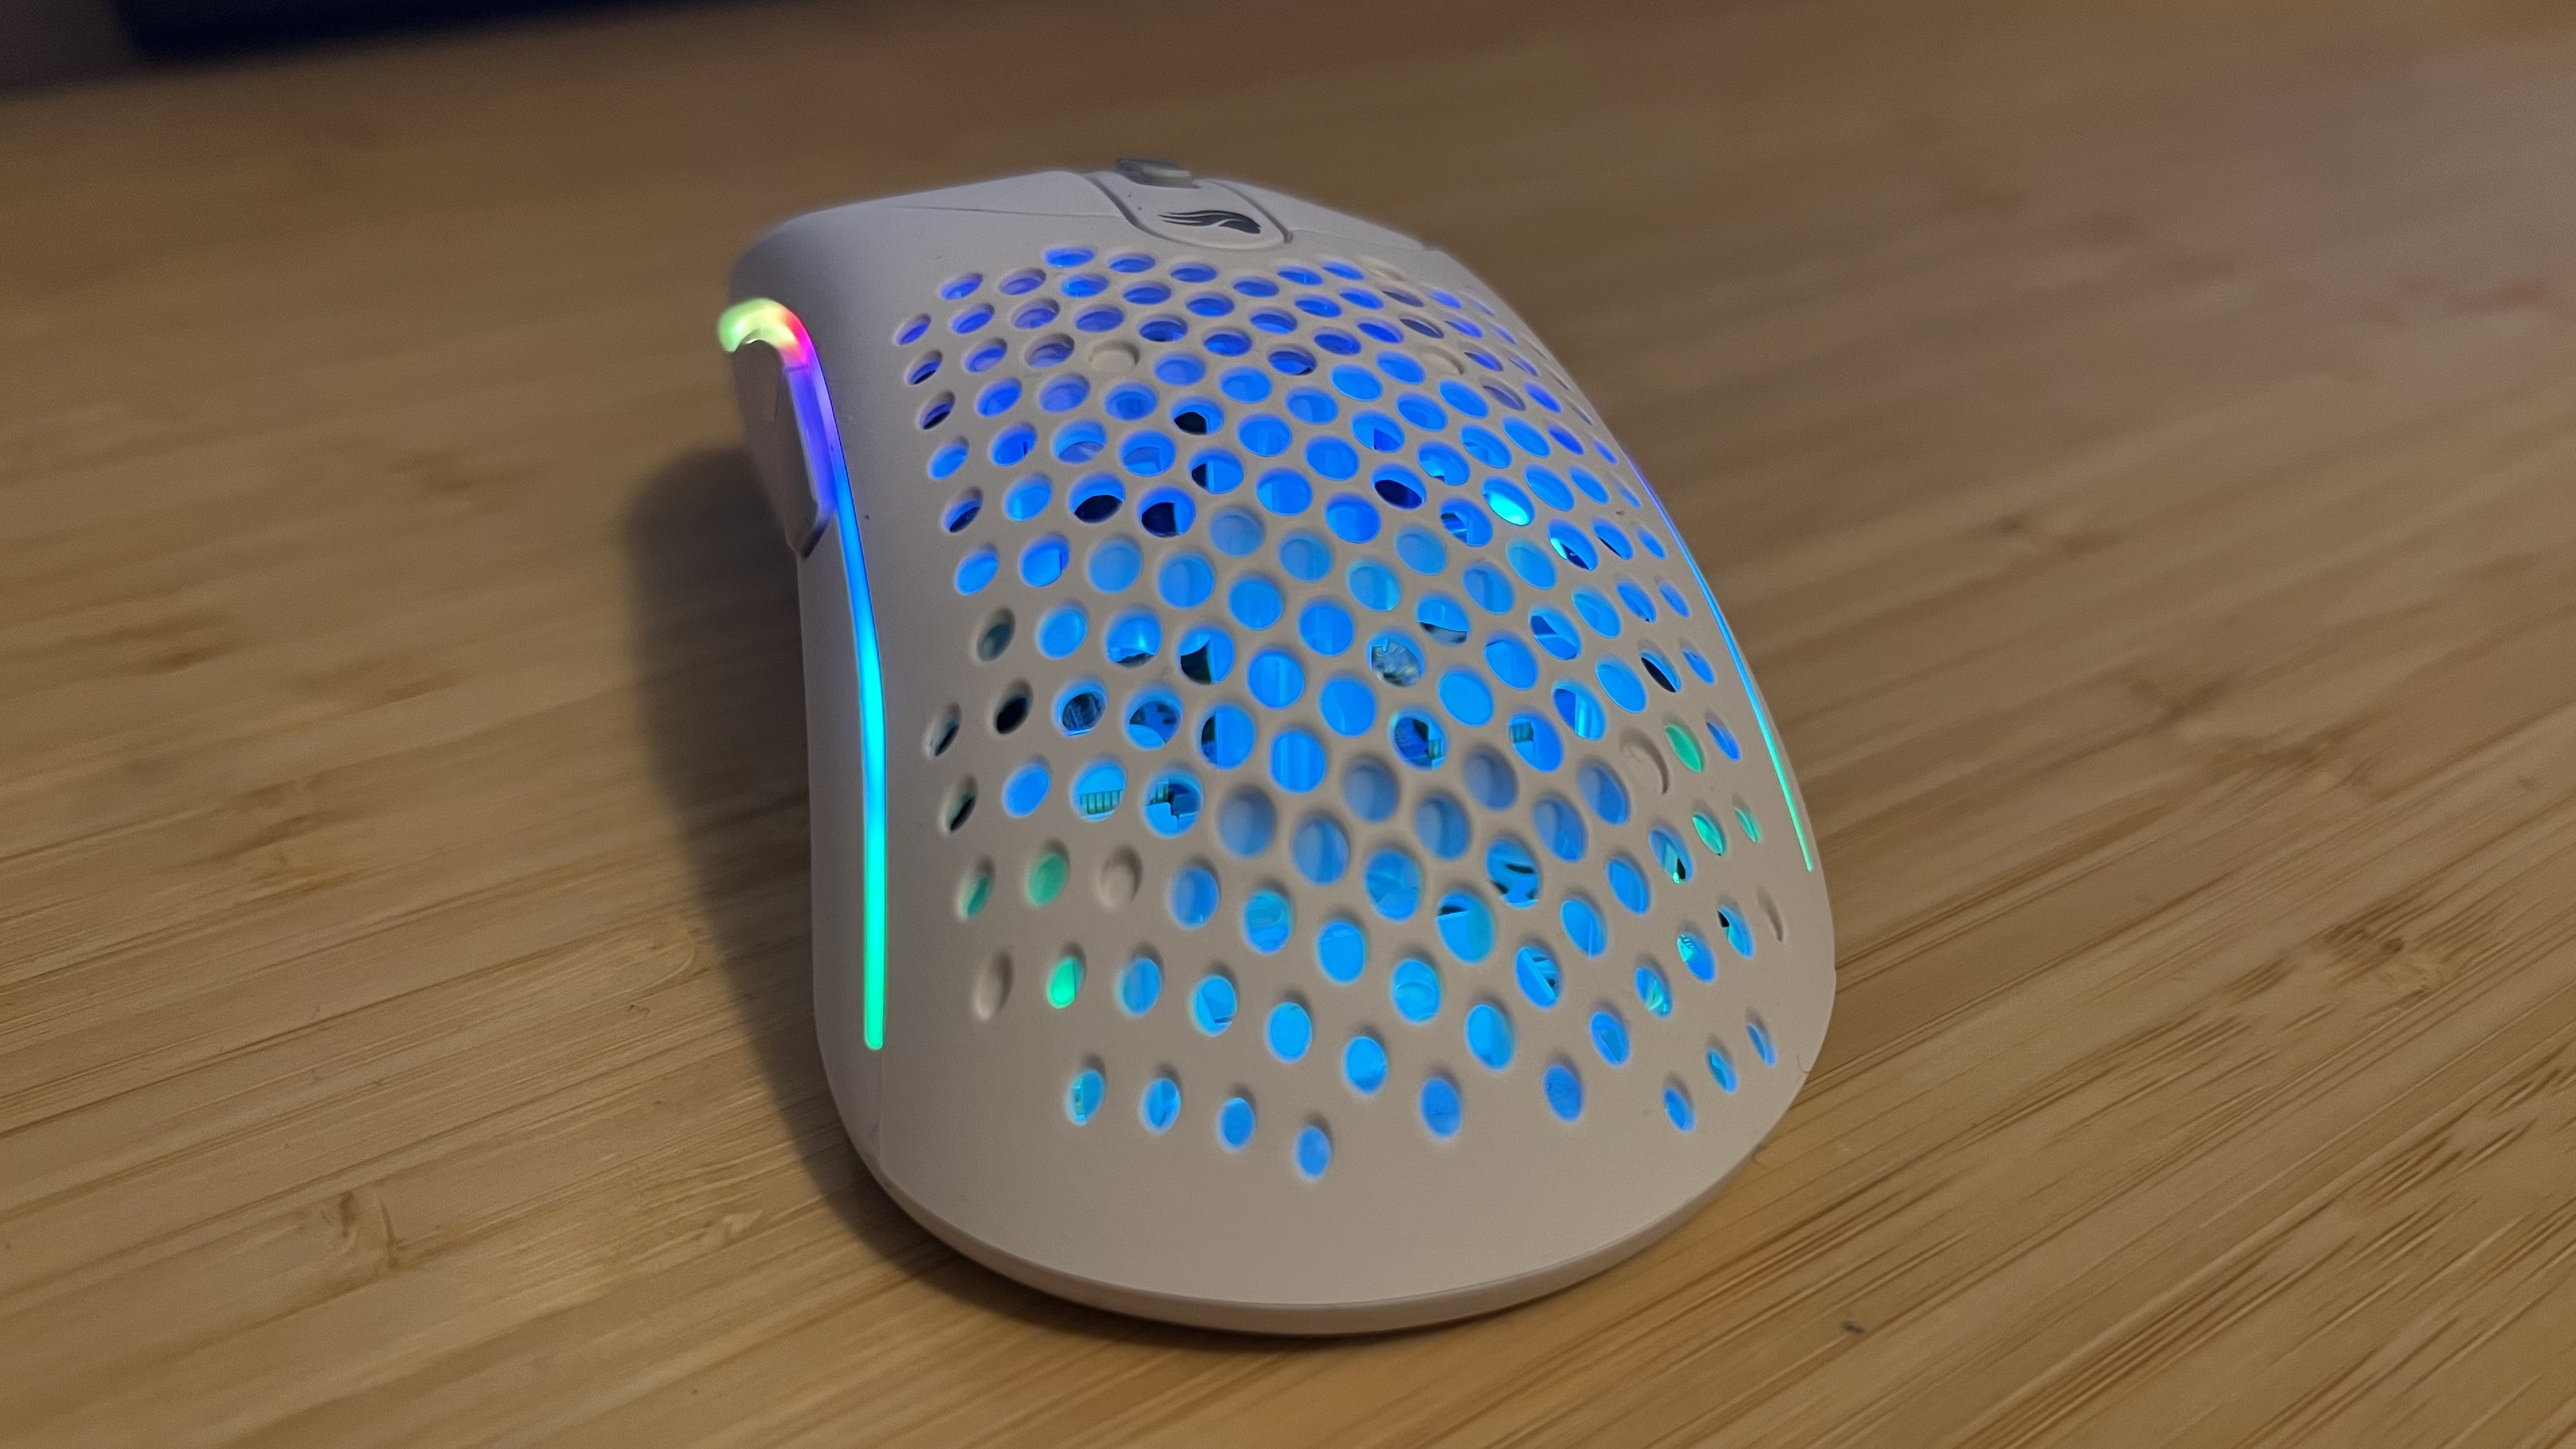 Glorious Model D 2 gaming mouse with RGB enabled.